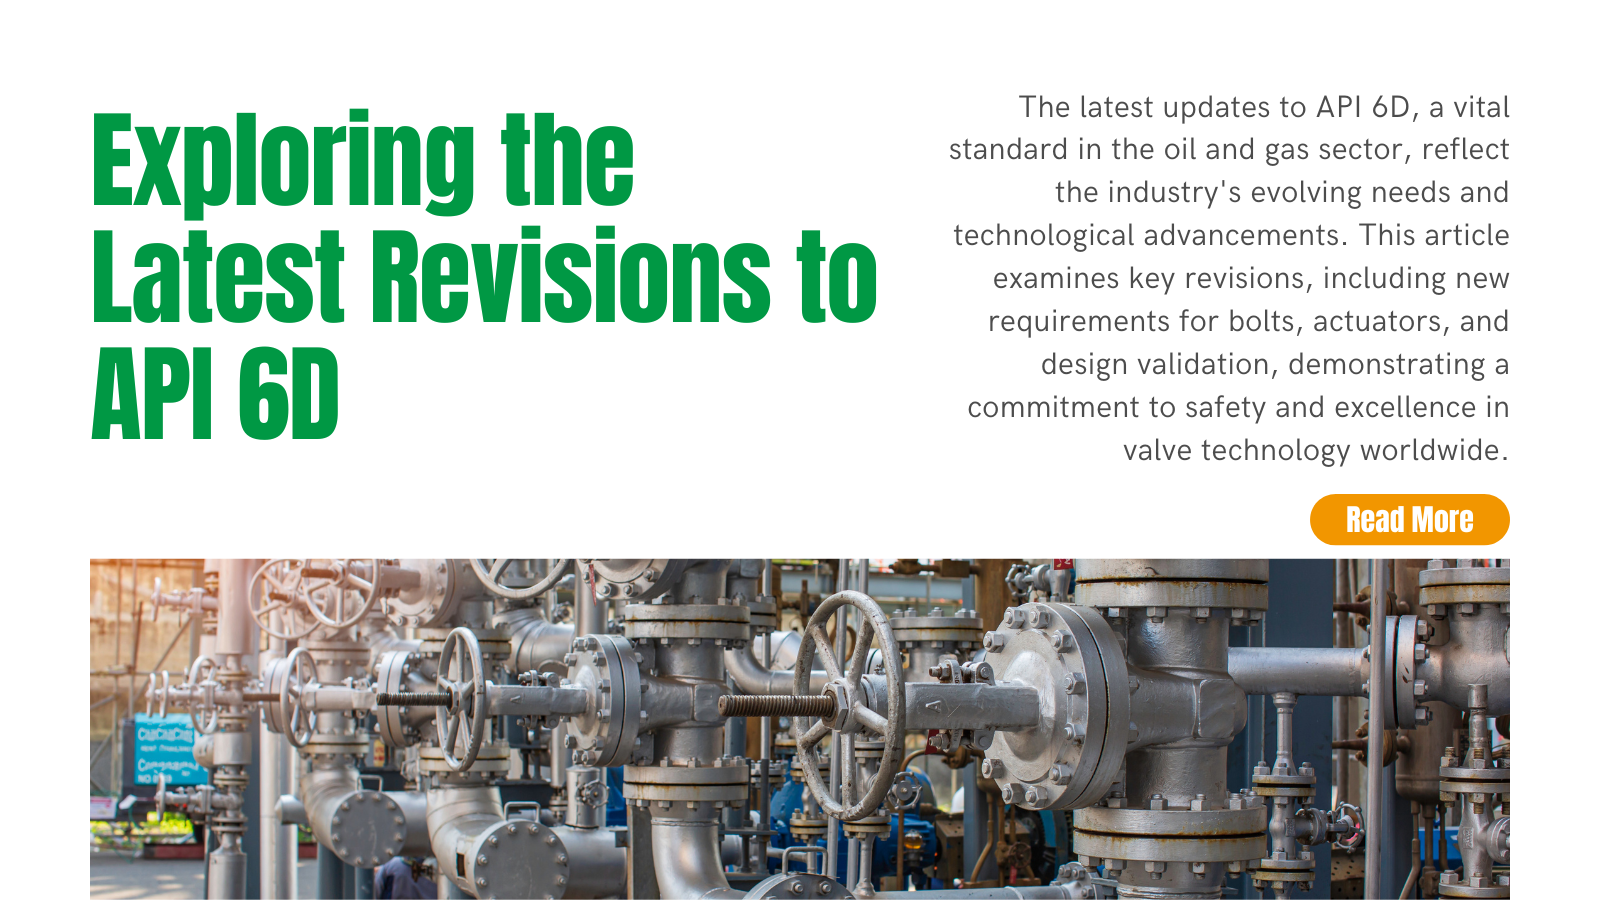 Exploring the Latest Revisions to API 6D: Enhancing Valve Standards for the Oil and Gas Industry | INOX-TEK